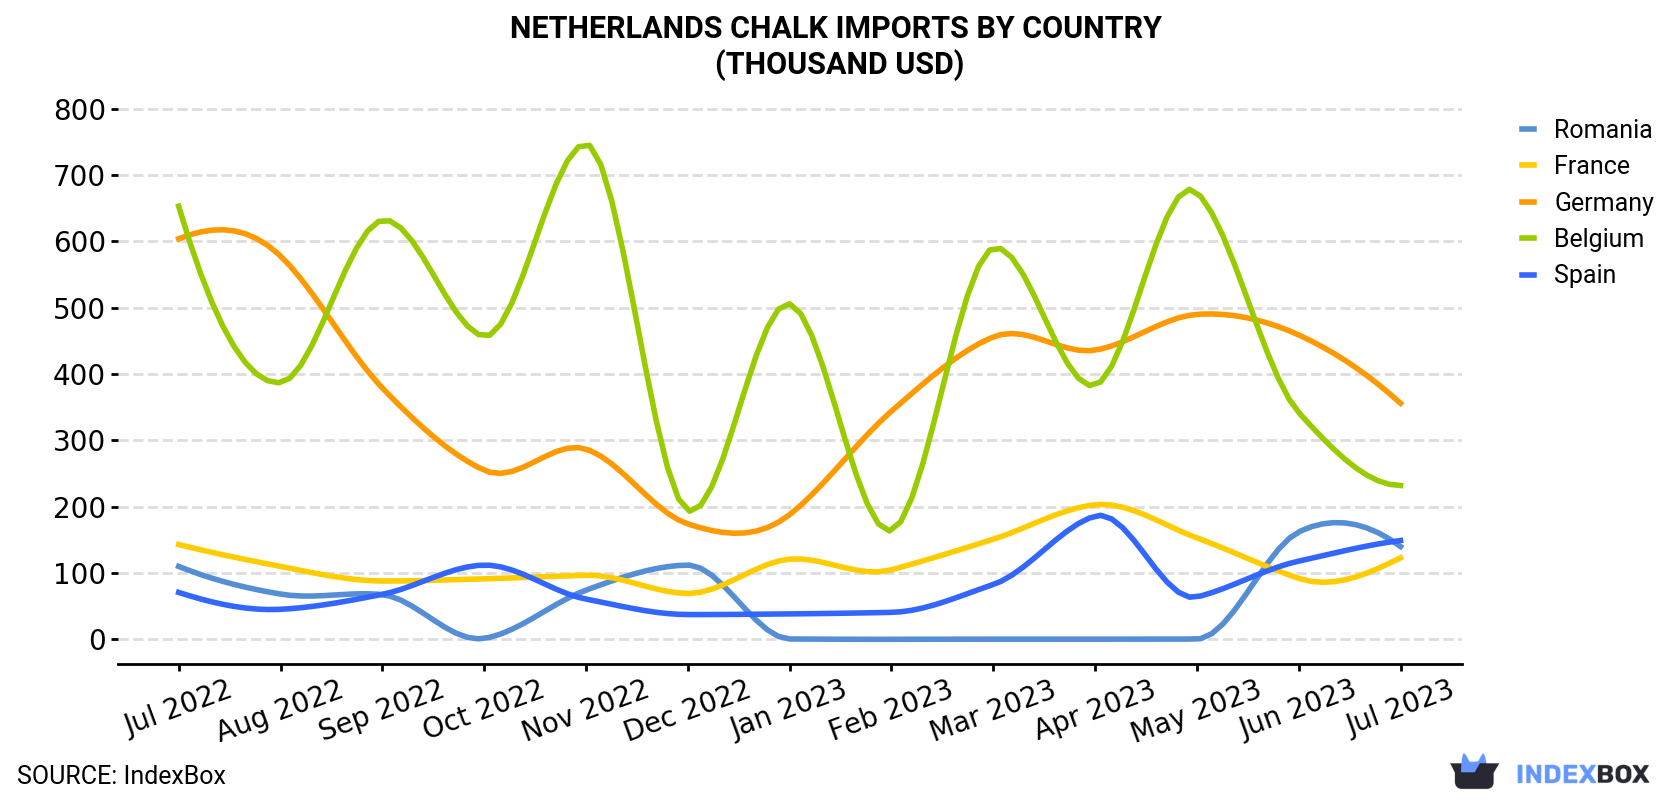 Netherlands Chalk Imports By Country (Thousand USD)